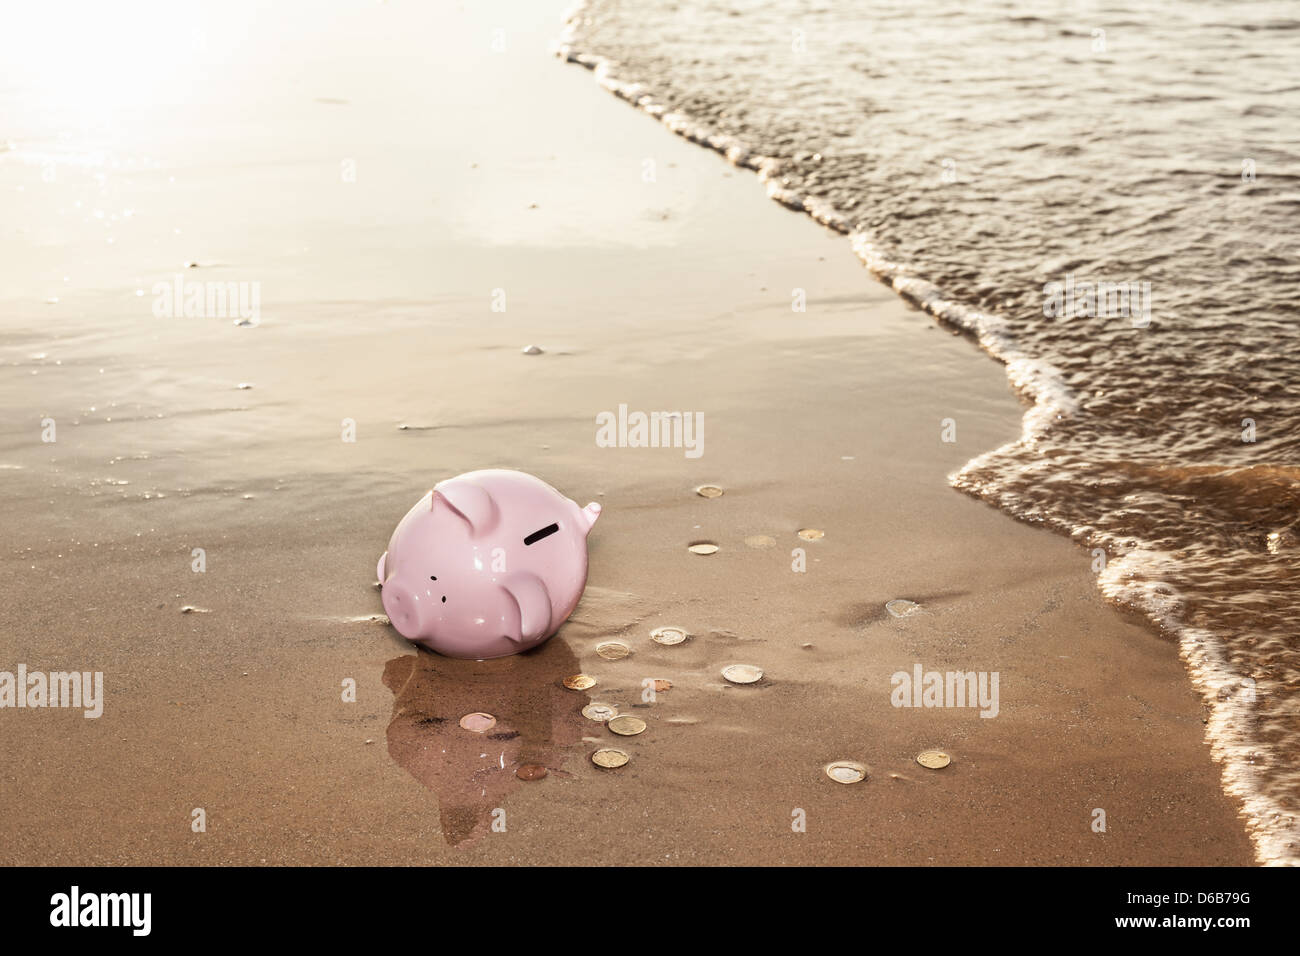 Piggy bank washed up on beach Stock Photo